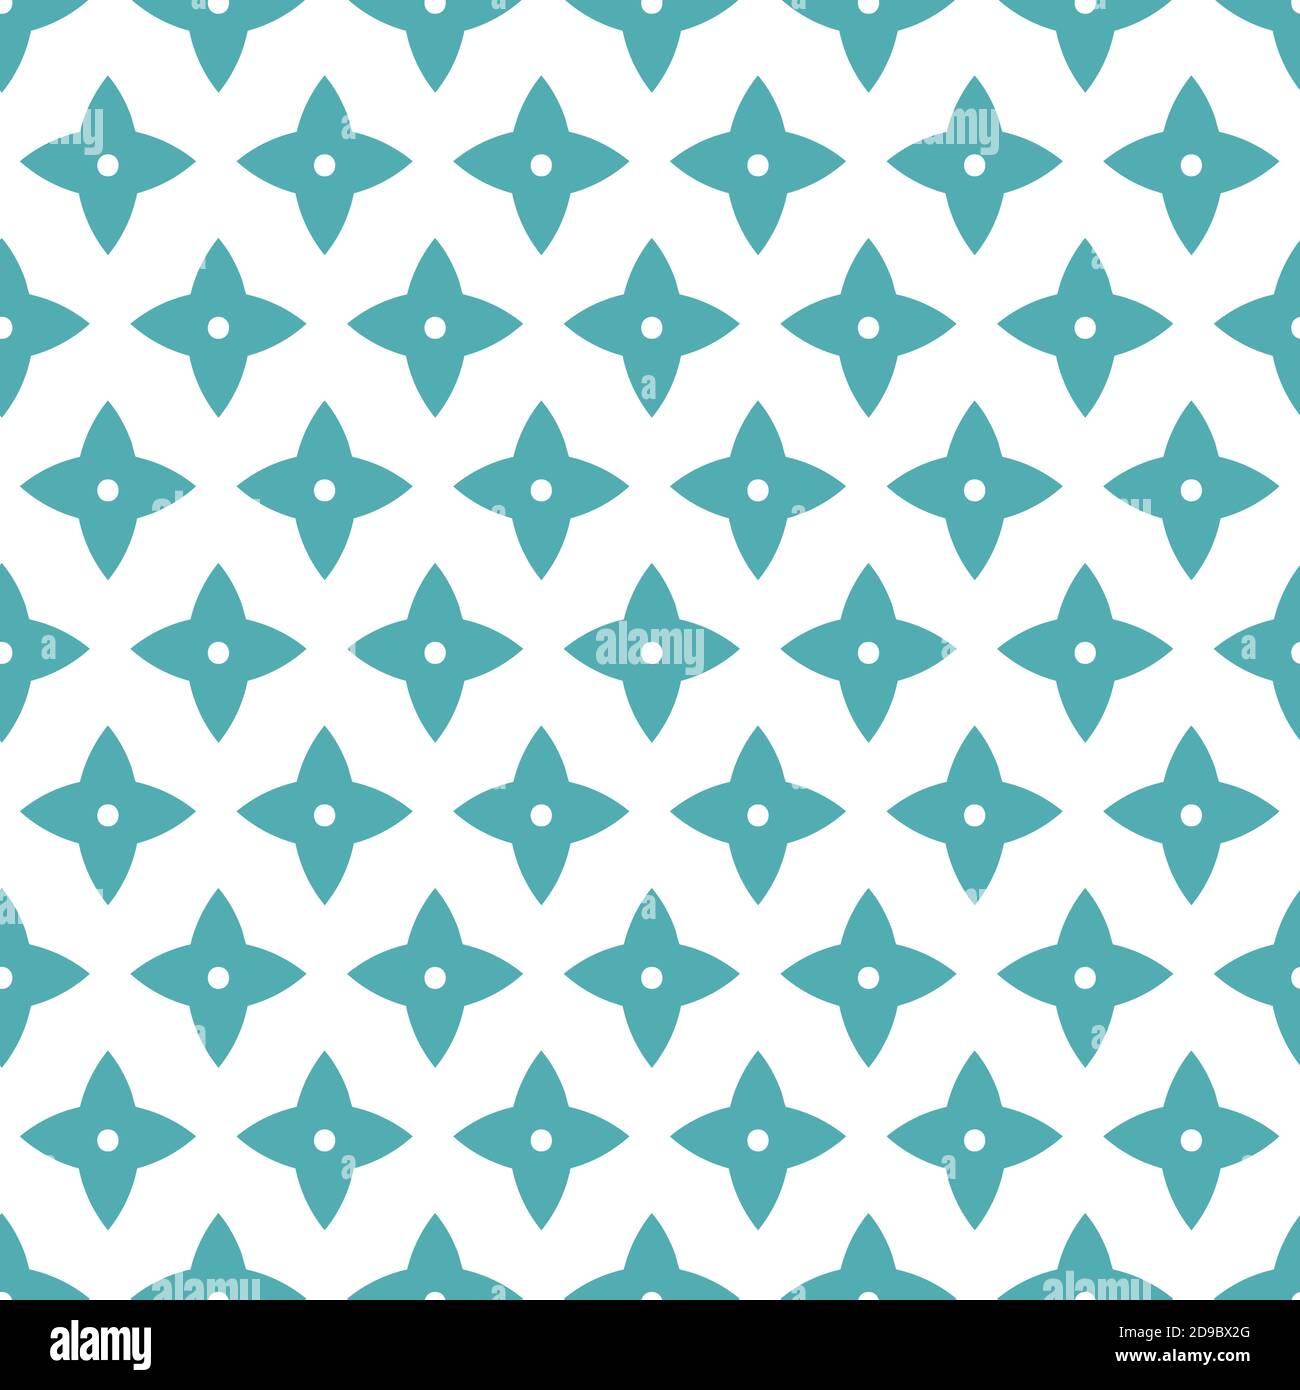 Vector geometric stylized blue flower pattern. Seamless vector design, simple ornament in blue tones. Cutout abstract star design. Perfect for paper projects, fabric and home decor. Stock Vector